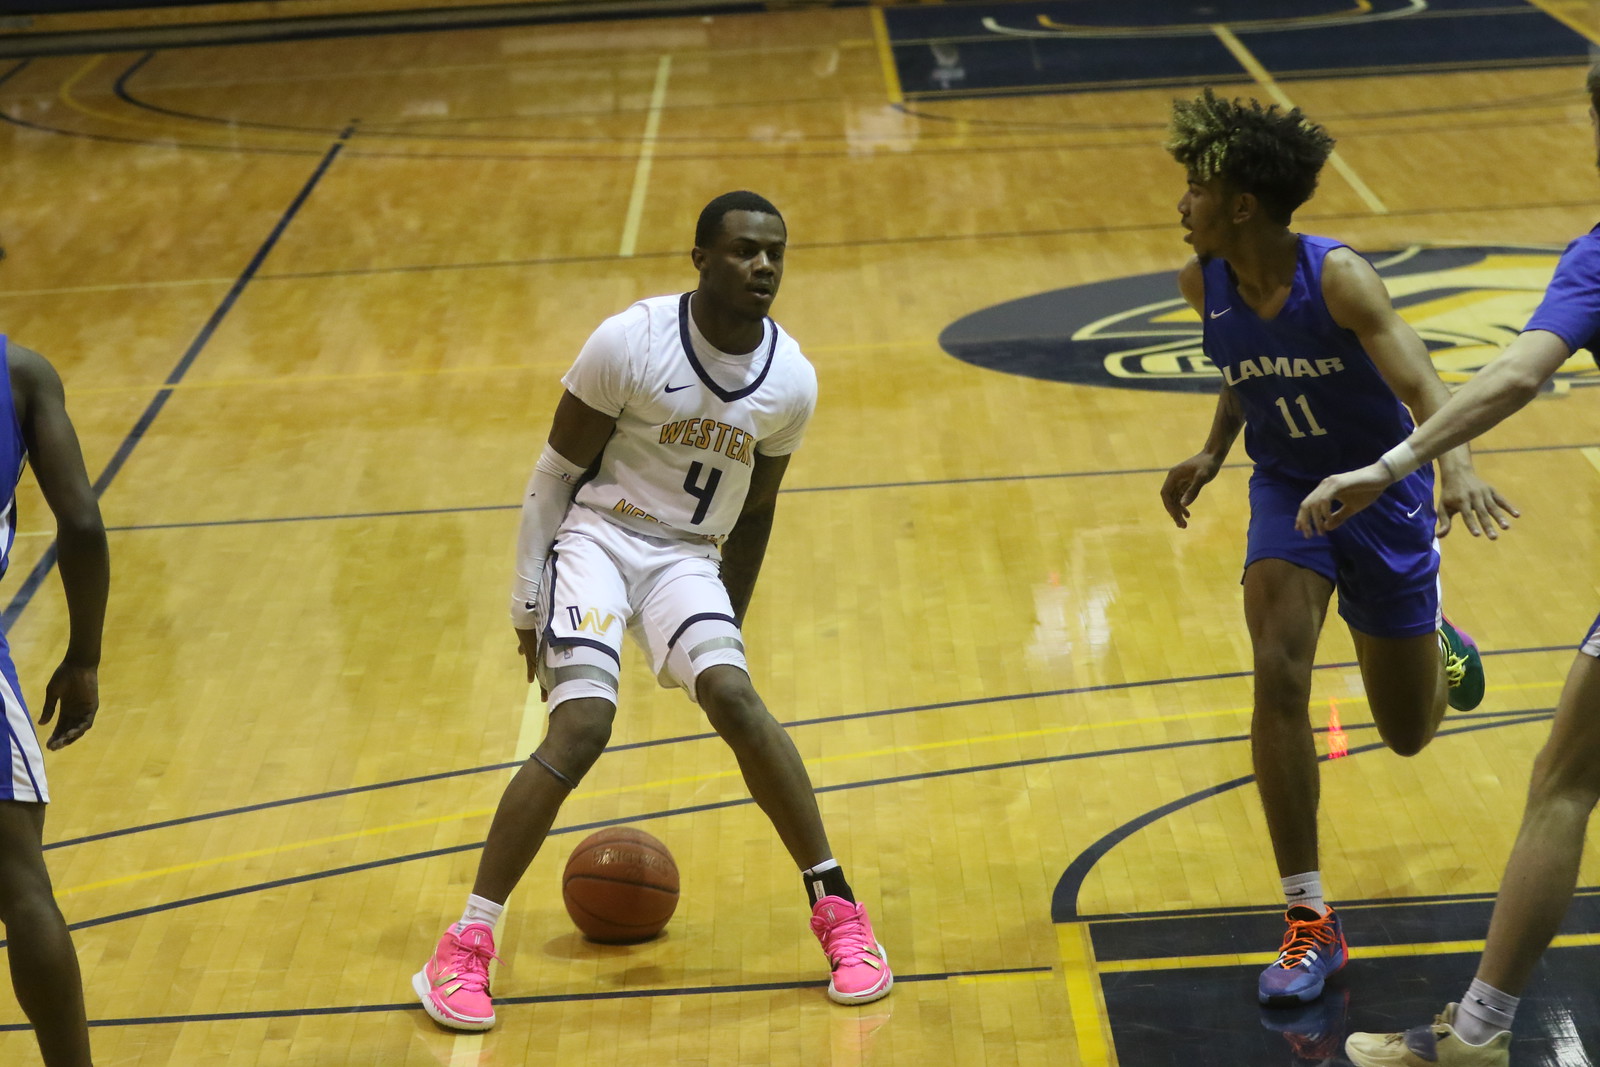 WNCC men come back to earn big win over Lamar